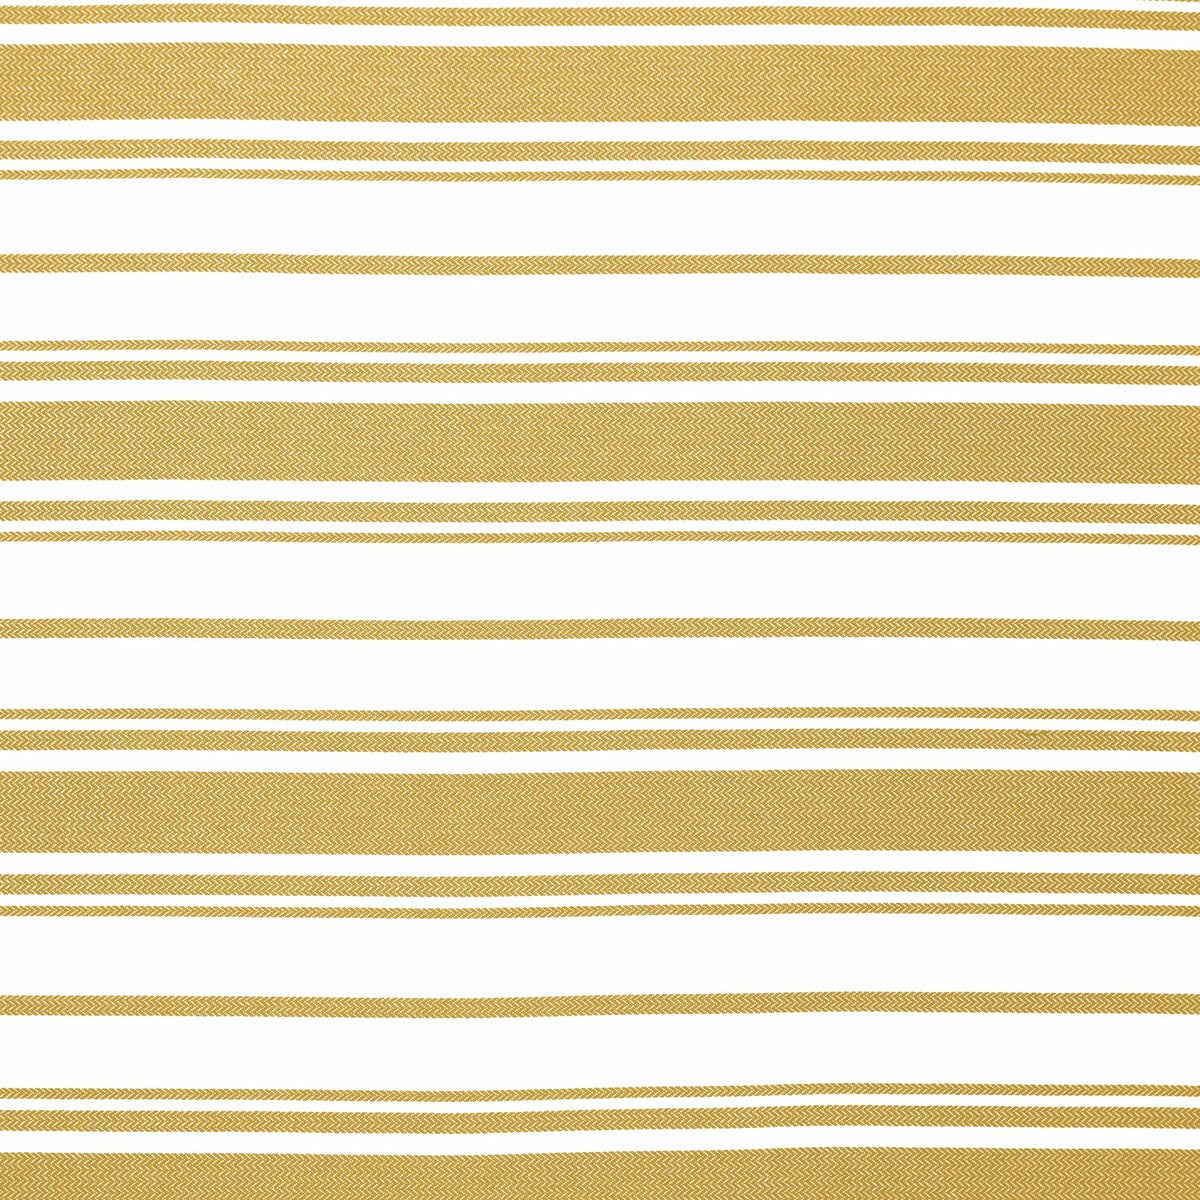 John fabric in amarillo color - pattern GDT5382.6.0 - by Gaston y Daniela in the Gaston Africalia collection